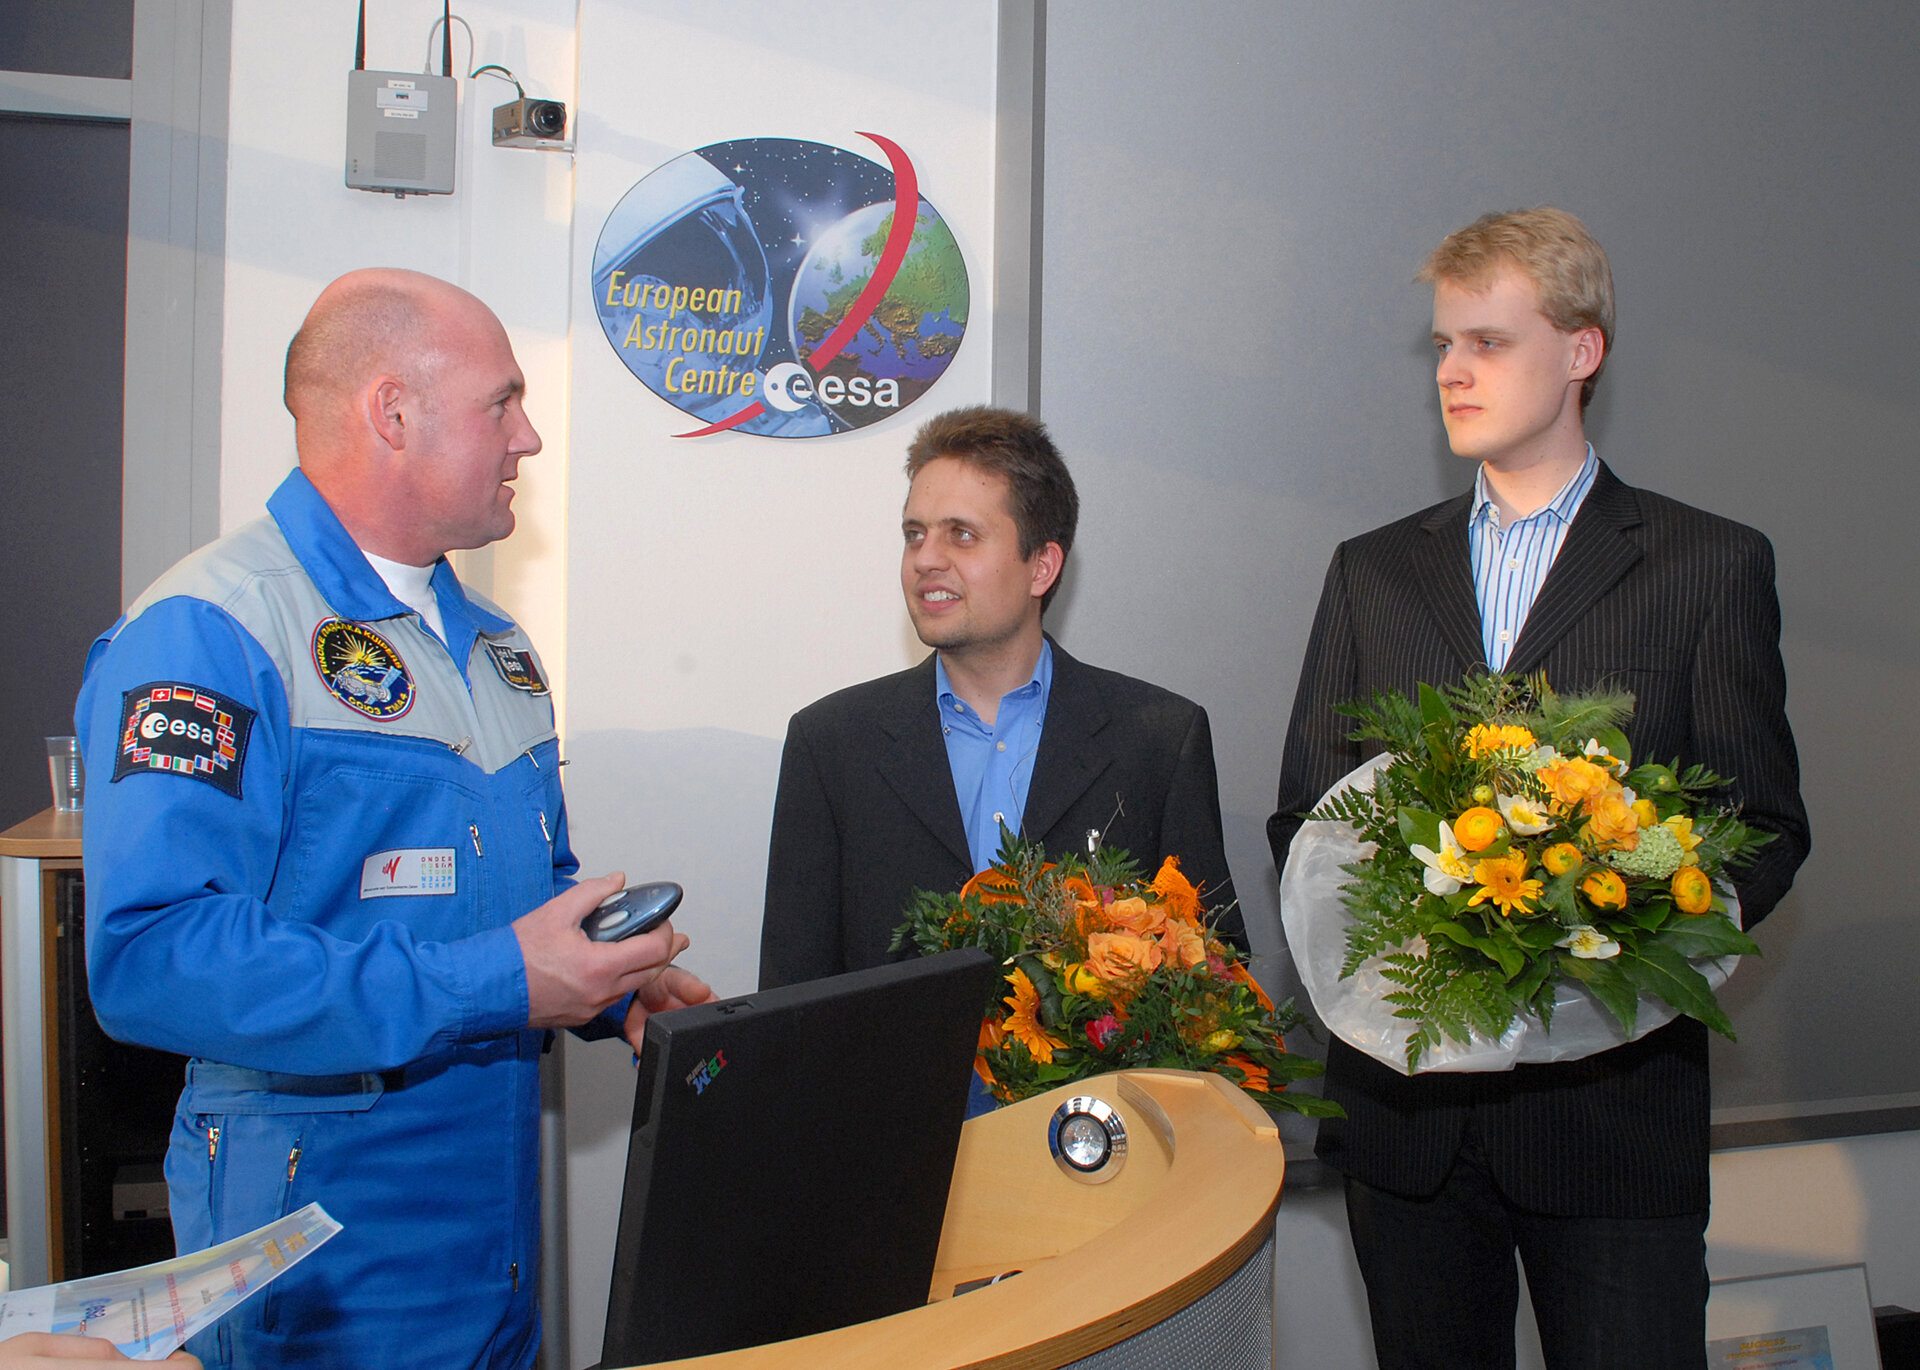 ESA astronaut André Kuipers also attended the award ceremony